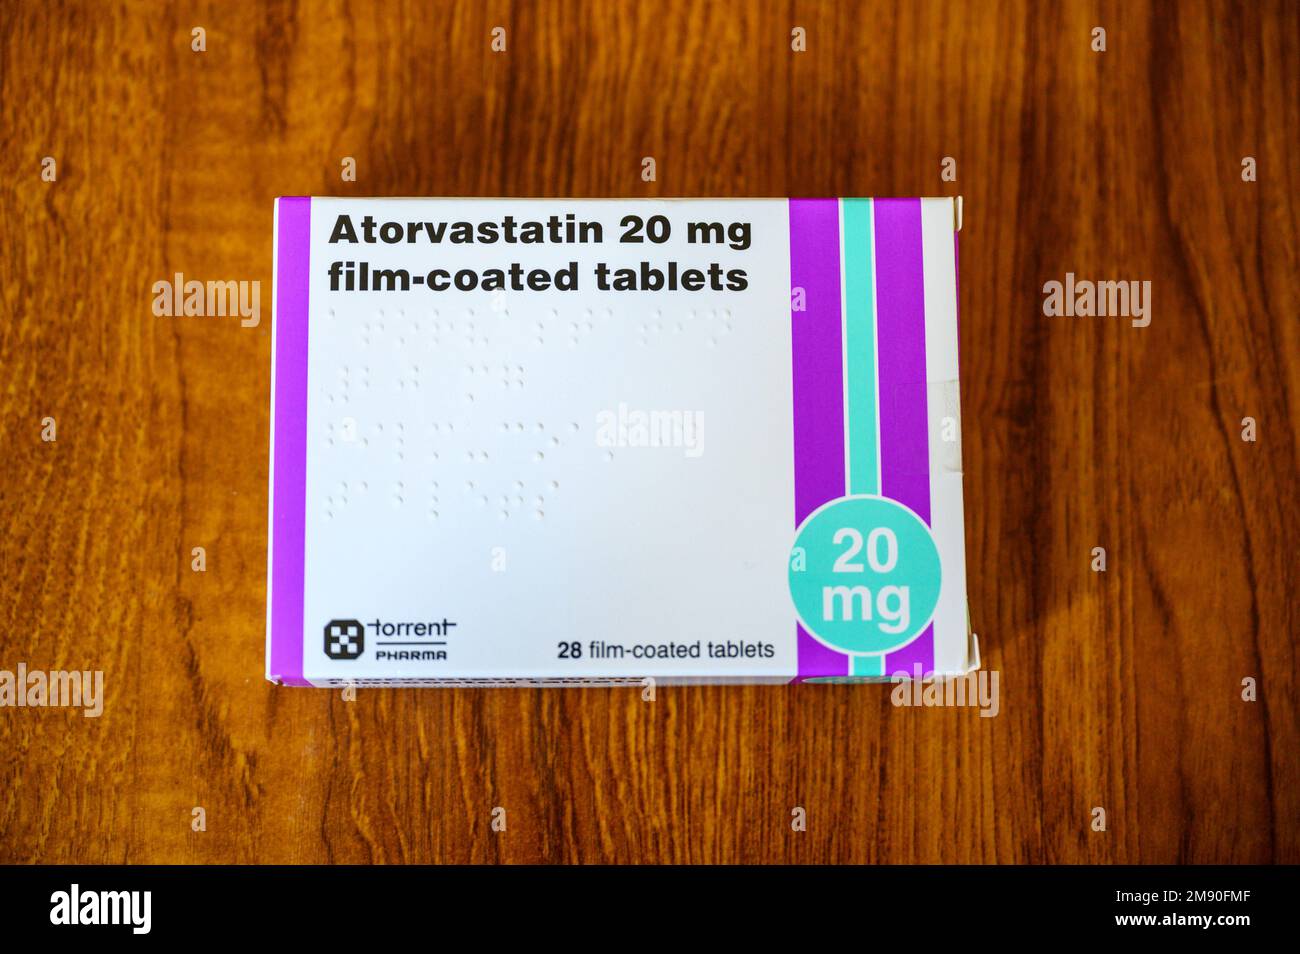 Atorvastatin 20 mg film coated tablets for the control of cholesterol levels. Stock Photo